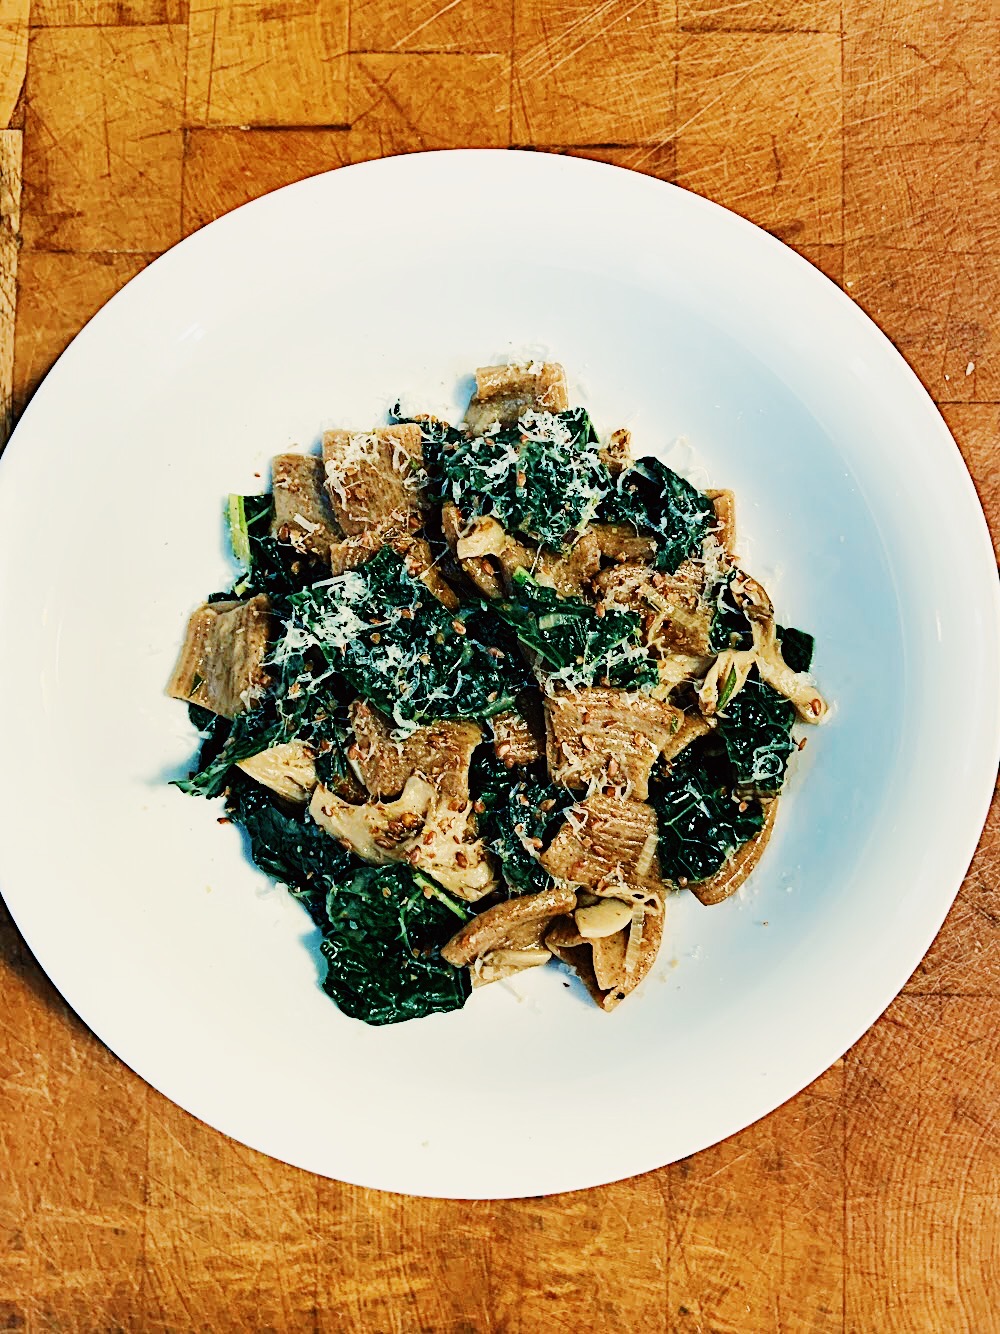 Overhead view of Pasta with Lacinato Kale, Maitake Mushrooms, & Flax Seed. Vegetables grown at Taproot Farm, PA. Recipe by Michael Joyce.